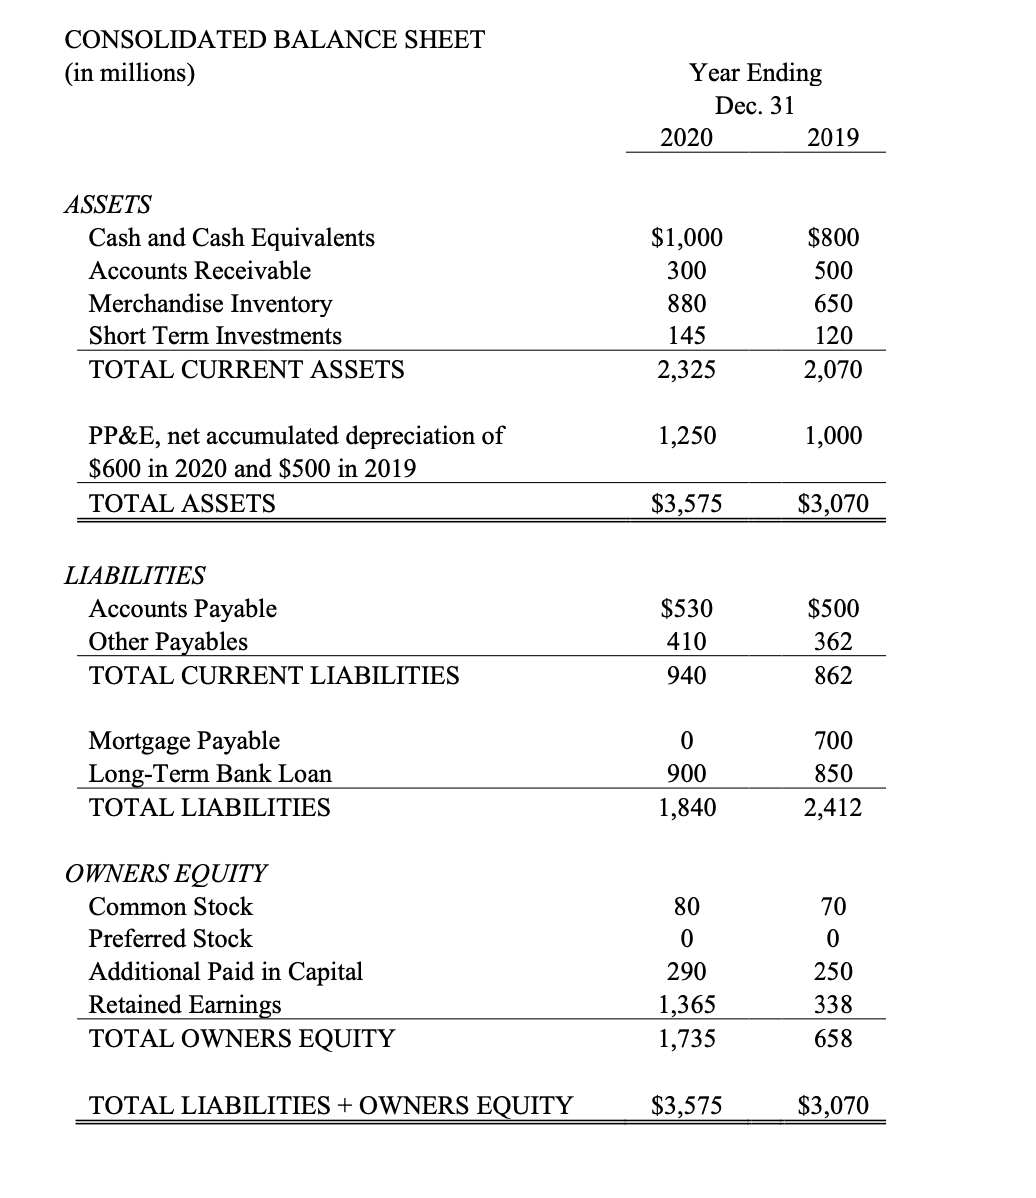 CONSOLIDATED BALANCE SHEET
(in millions)
Year Ending
Dec. 31
2020
2019
ASSETS
Cash and Cash Equivalents
$1,000
$800
Accounts Receivable
300
500
Merchandise Inventory
880
650
Short Term Investments
145
120
TOTAL CURRENT ASSETS
2,325
2,070
PP&E, net accumulated depreciation of
$600 in 2020 and $500 in 2019
1,250
1,000
TOTAL ASSETS
$3,575
$3,070
LIABILITIES
Accounts Payable
Other Payables
$530
$500
410
362
TOTAL CURRENT LIABILITIES
940
862
Mortgage Payable
Long-Term Bank Loan
700
900
850
TOTAL LIABILITIES
1,840
2,412
OWNERS EQUITY
Common Stock
80
70
Preferred Stock
Additional Paid in Capital
Retained Earnings
TOTAL OWNERS EQUITY
290
250
1,365
1,735
338
658
TOTAL LIABILITIES + OWNERS EQUITY
$3,575
$3,070
